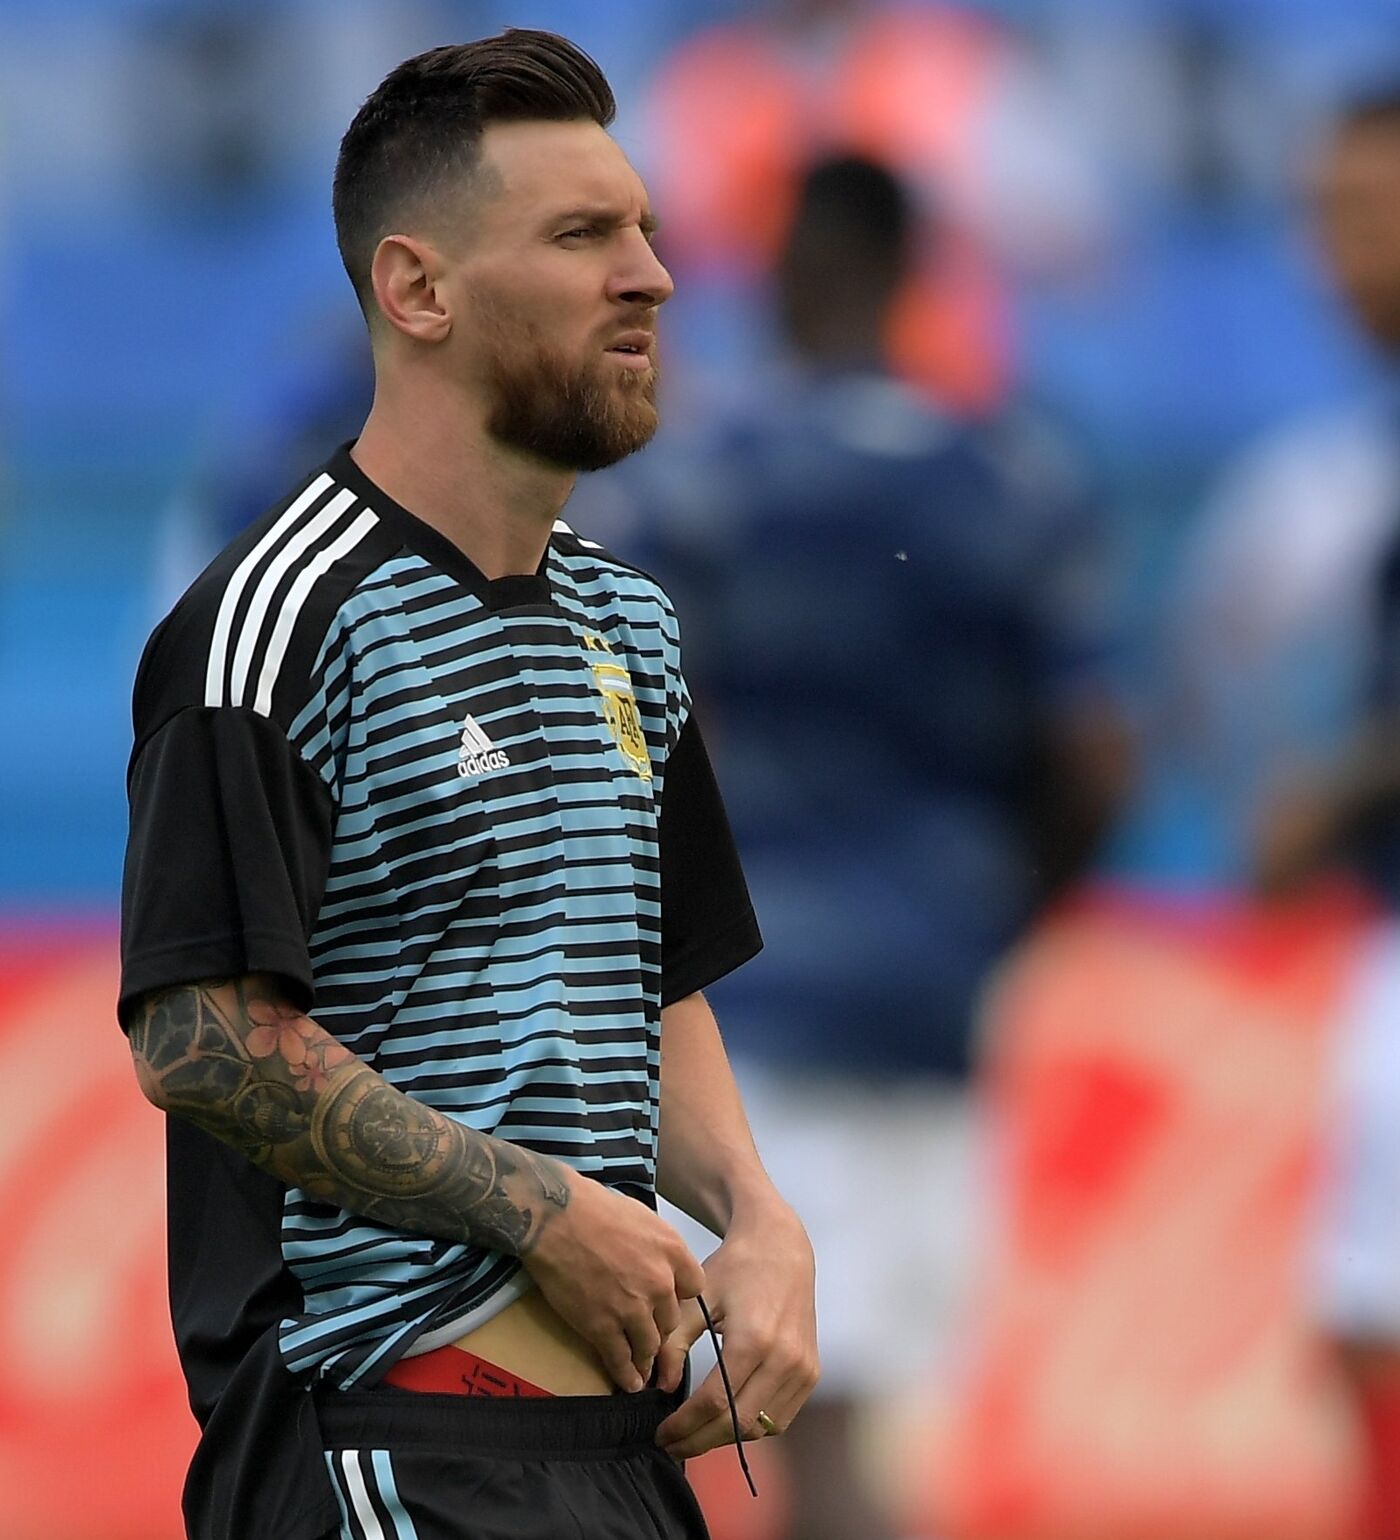 Messi Reportedly Determined Who Wouldn't Play for Argentina World Cup Team  - 14.07.2018, Sputnik International